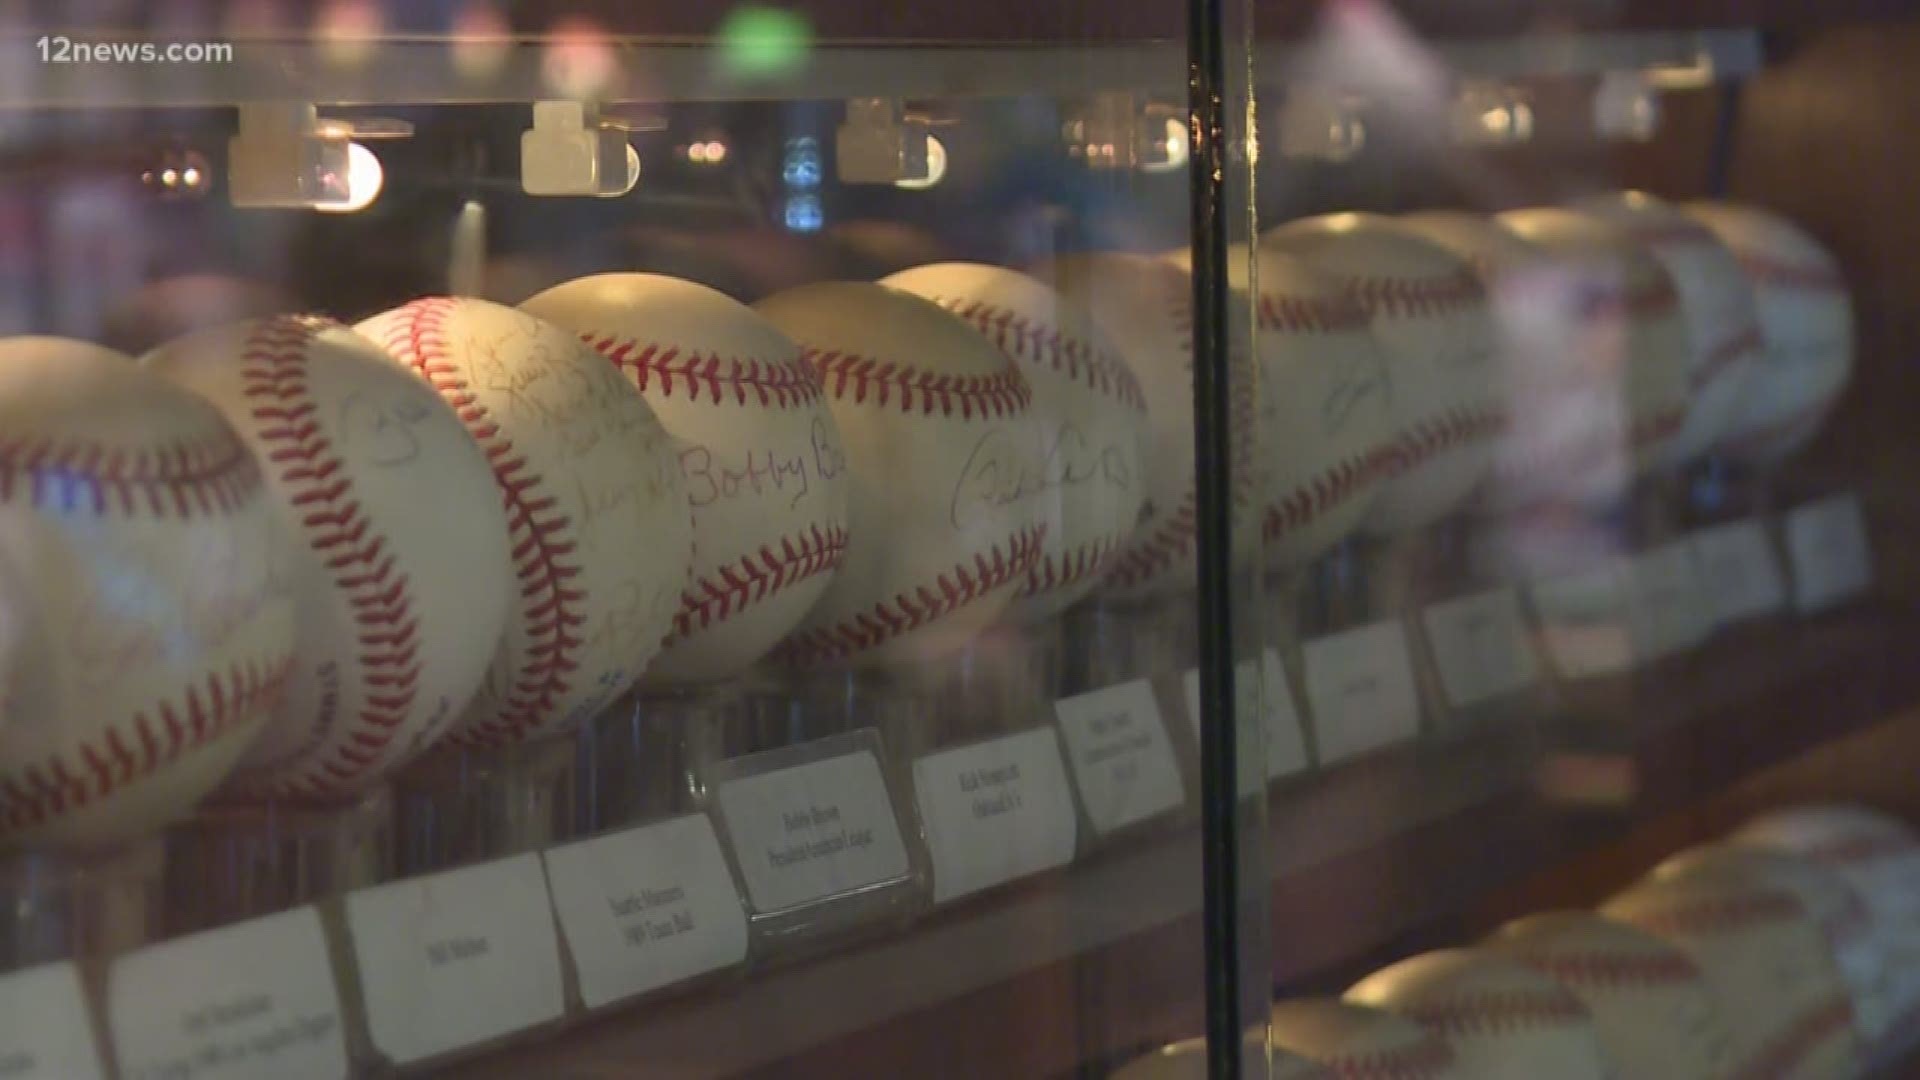 Could the bold bandit who stole 33 autographed baseballs from iconic Scottsdale restaurant Don and Charlie's actually sell them?